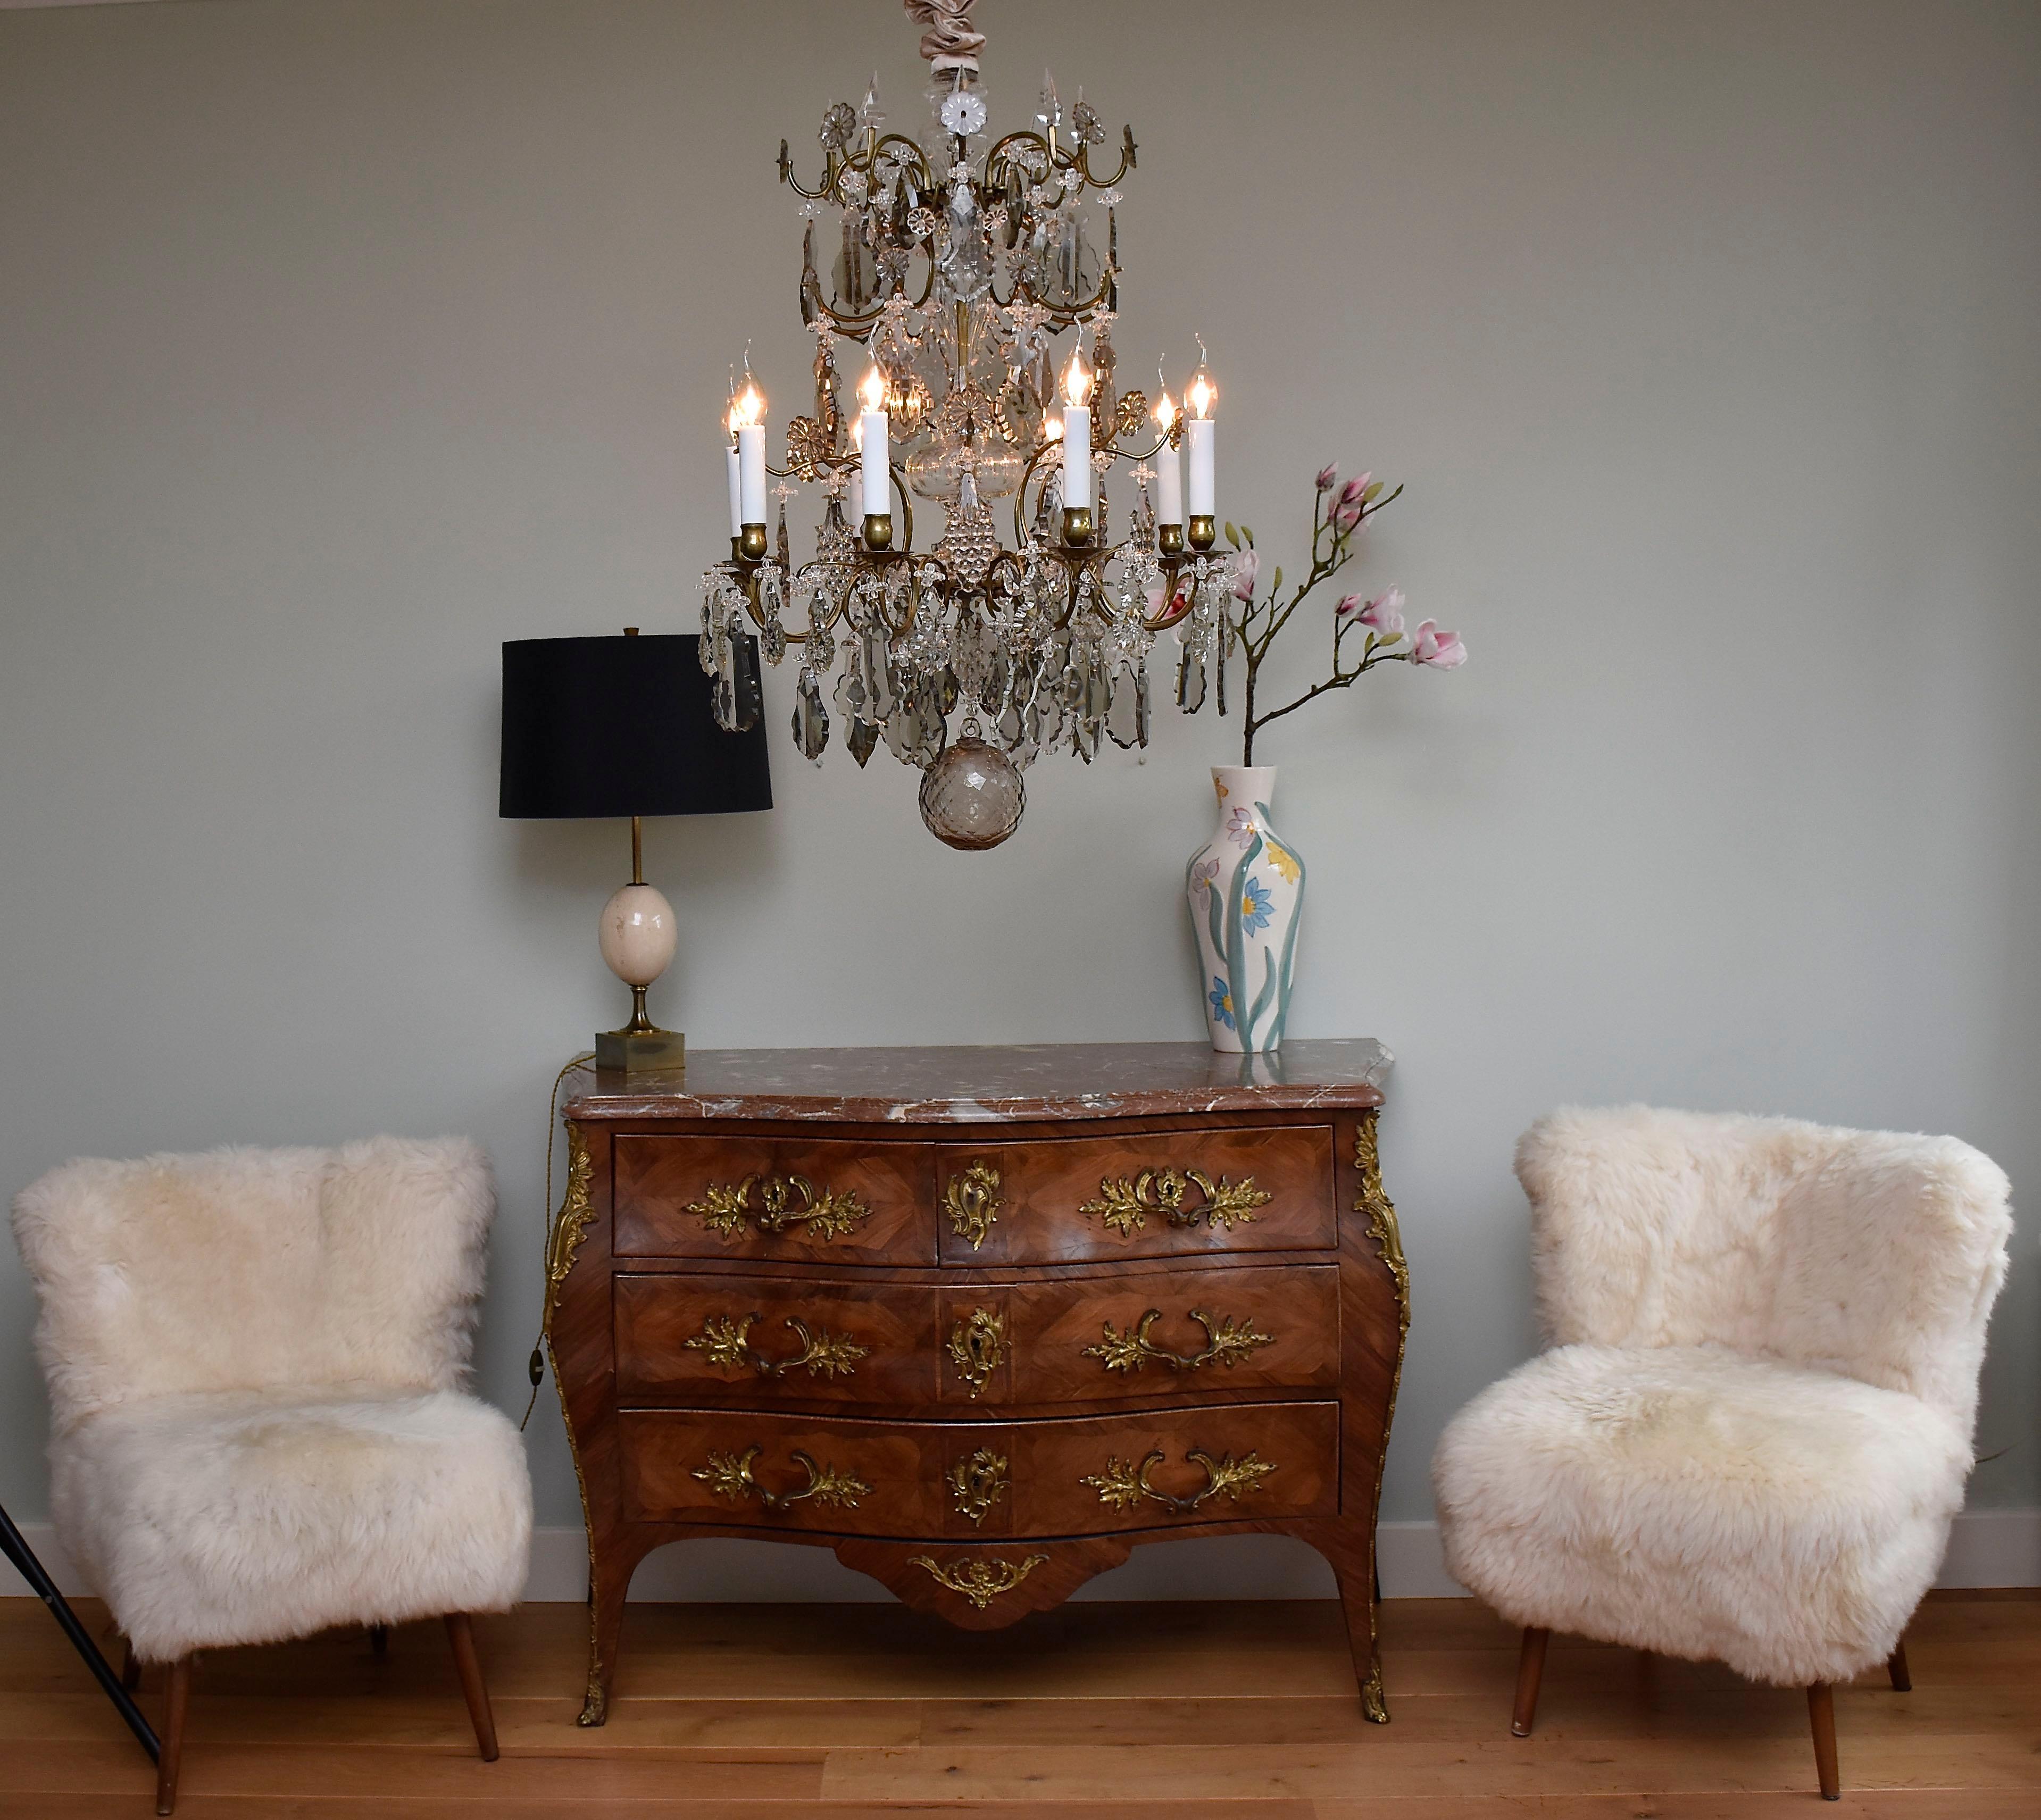 A beautiful Rococo style chandelier with 8 lights.
The chandelier is richly decorated with clear and soft coloured crystal pendeloques and flower rosettes.
The central stem is covered with beautiful decorative vases.
At the bottom of the chandelier